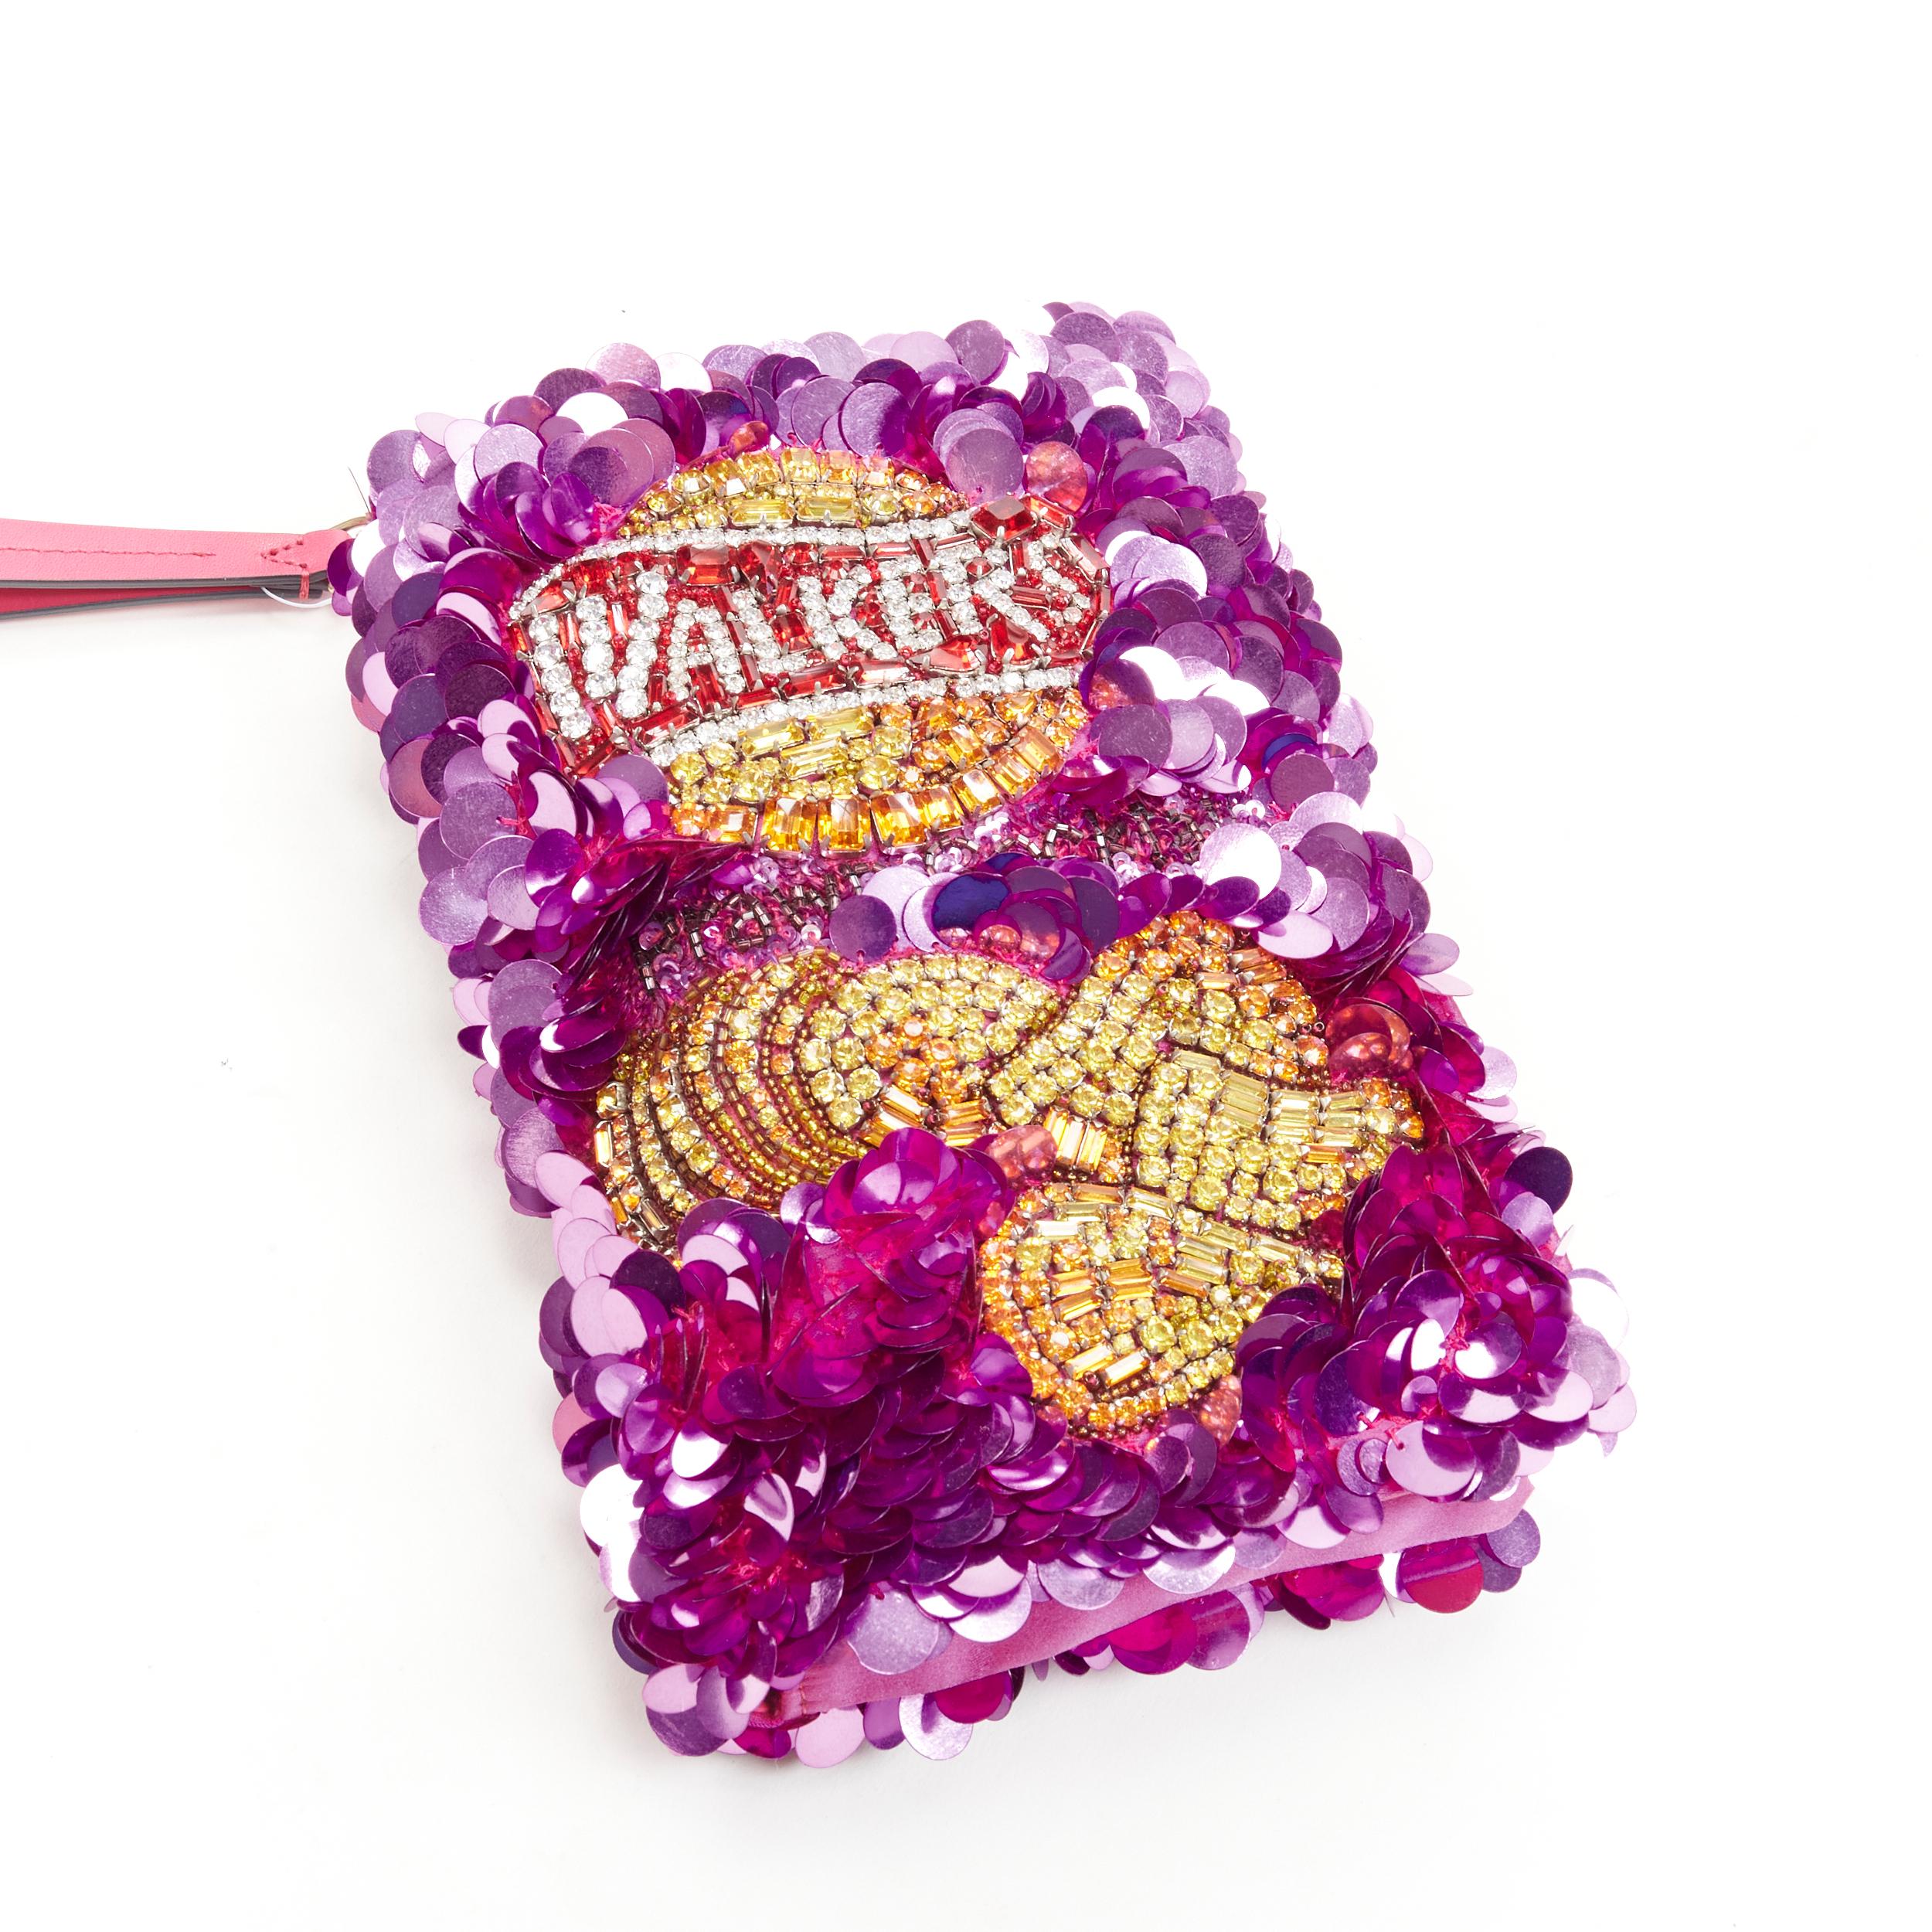 ANYA HINDMARCH Walkers Prawn Cocktail Chips pink sequins crystal clutch bag 3